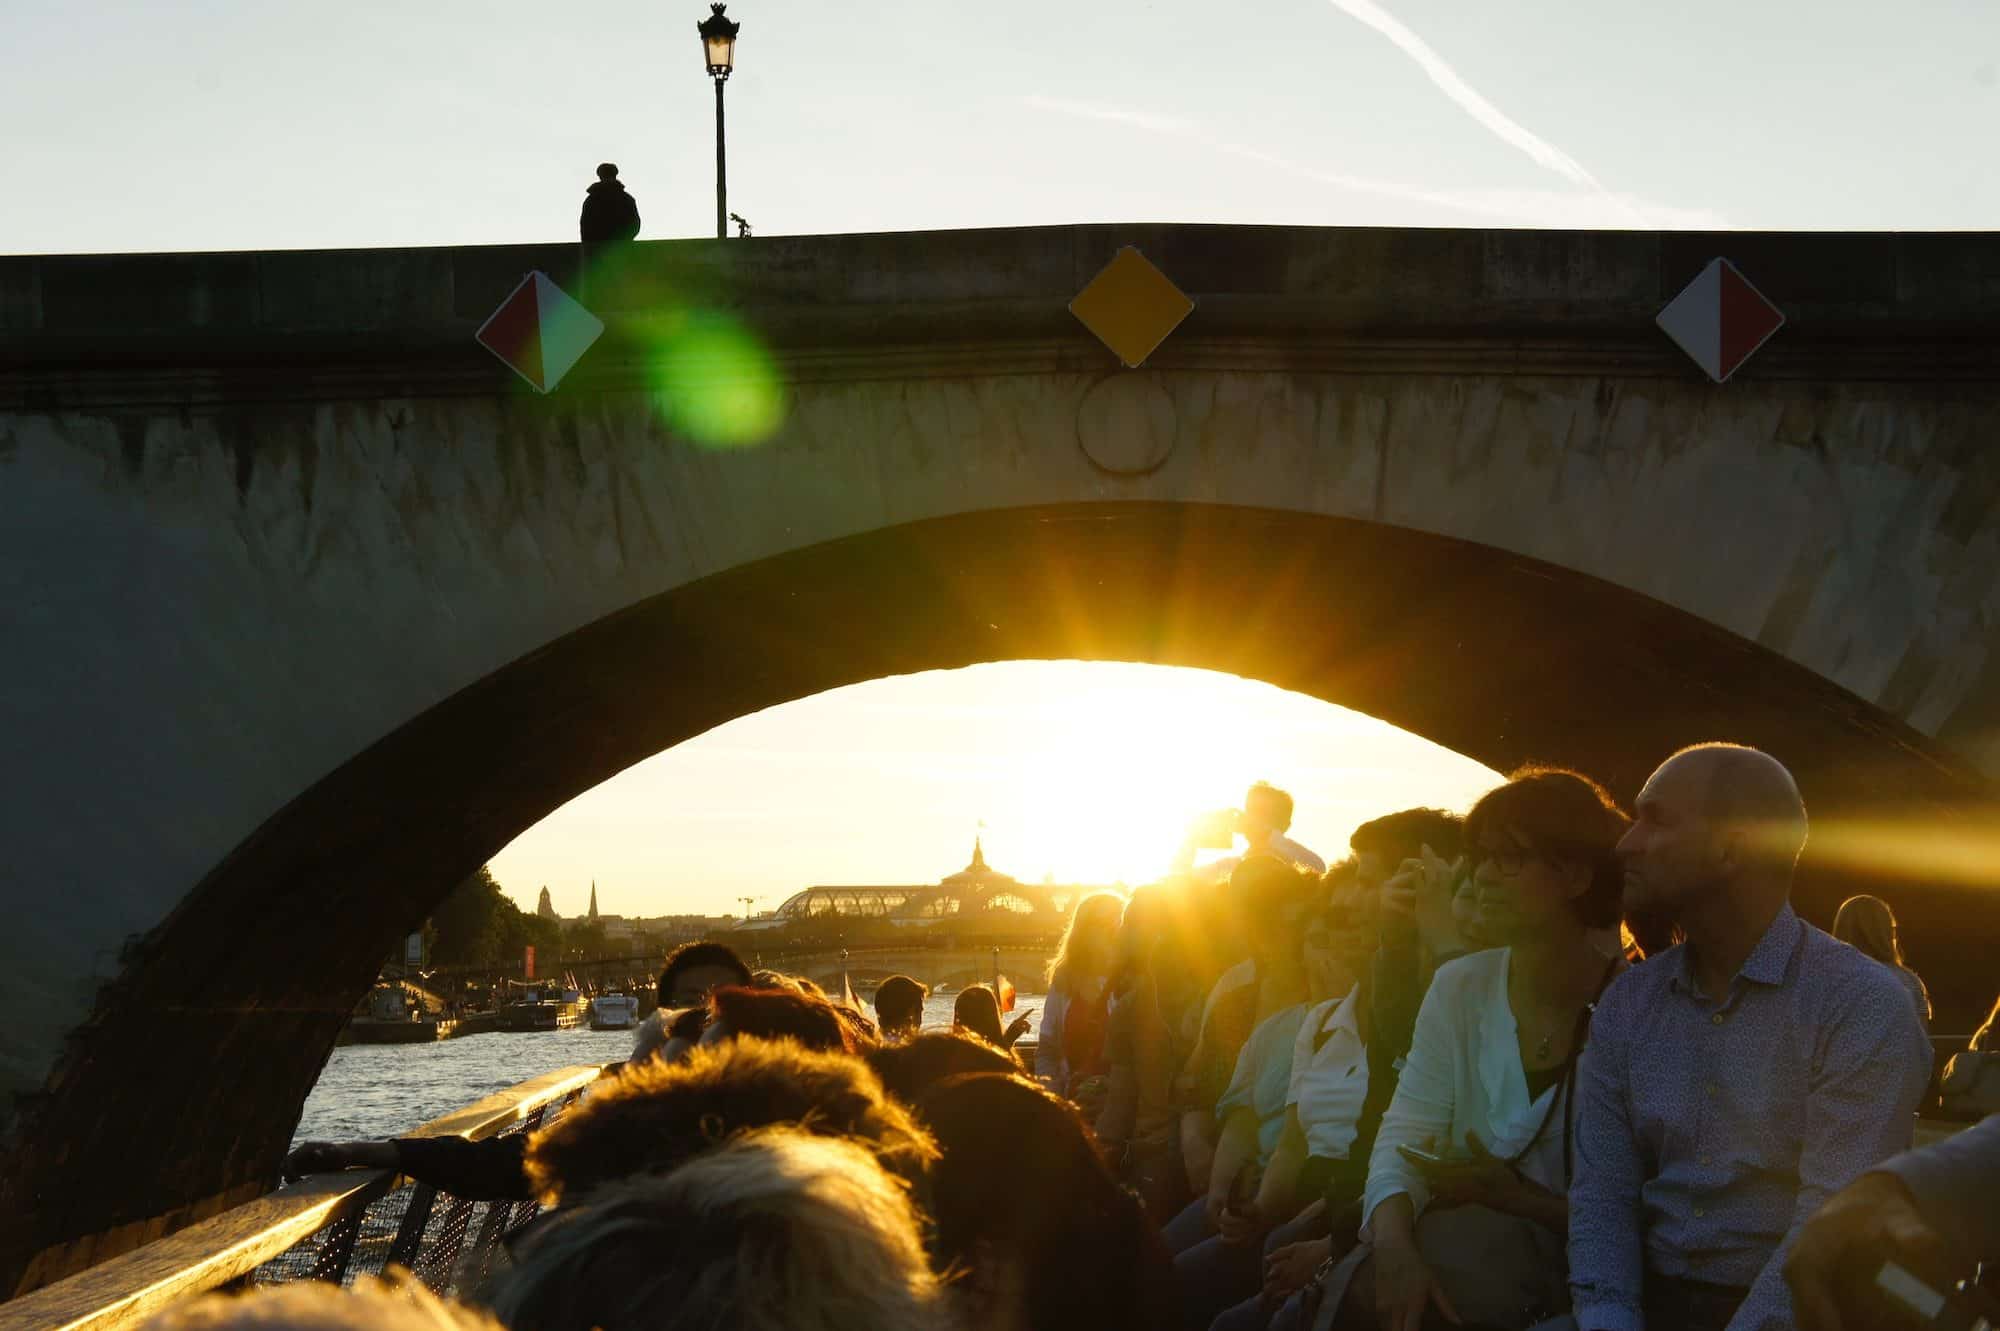 Tourists on a barge boat on the River Seine as the sun sets above the Grand Palais as seen peeping out from under one of the bridges straddling the river.